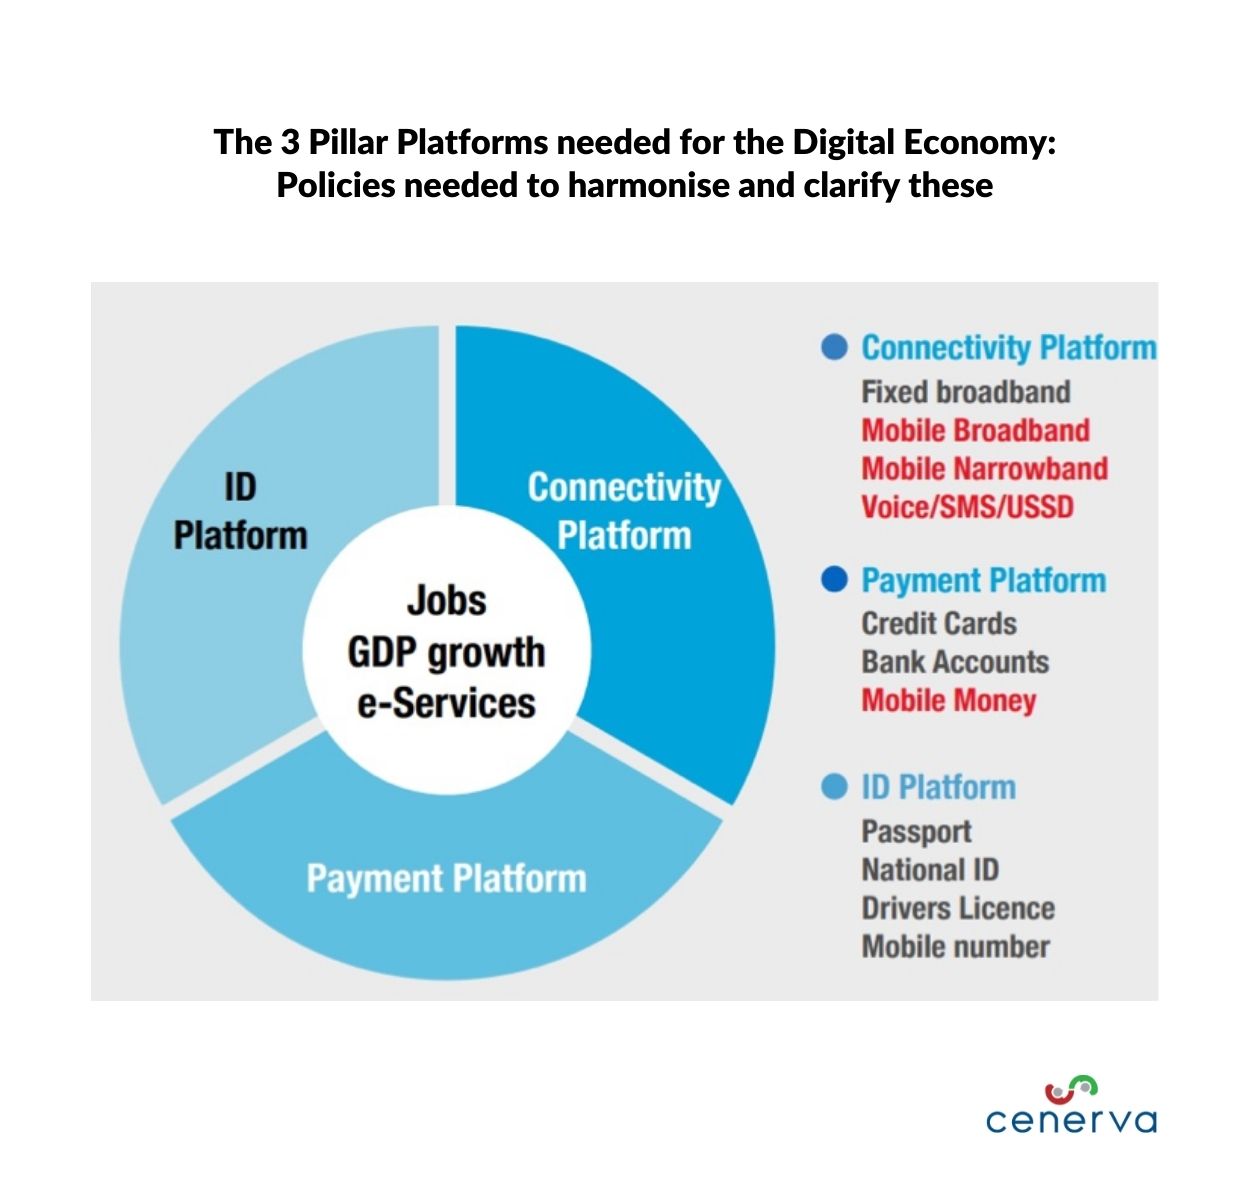 The 3 Pillar Platforms needed for the Digital Economy: Policies needed to harmonise and clarify these